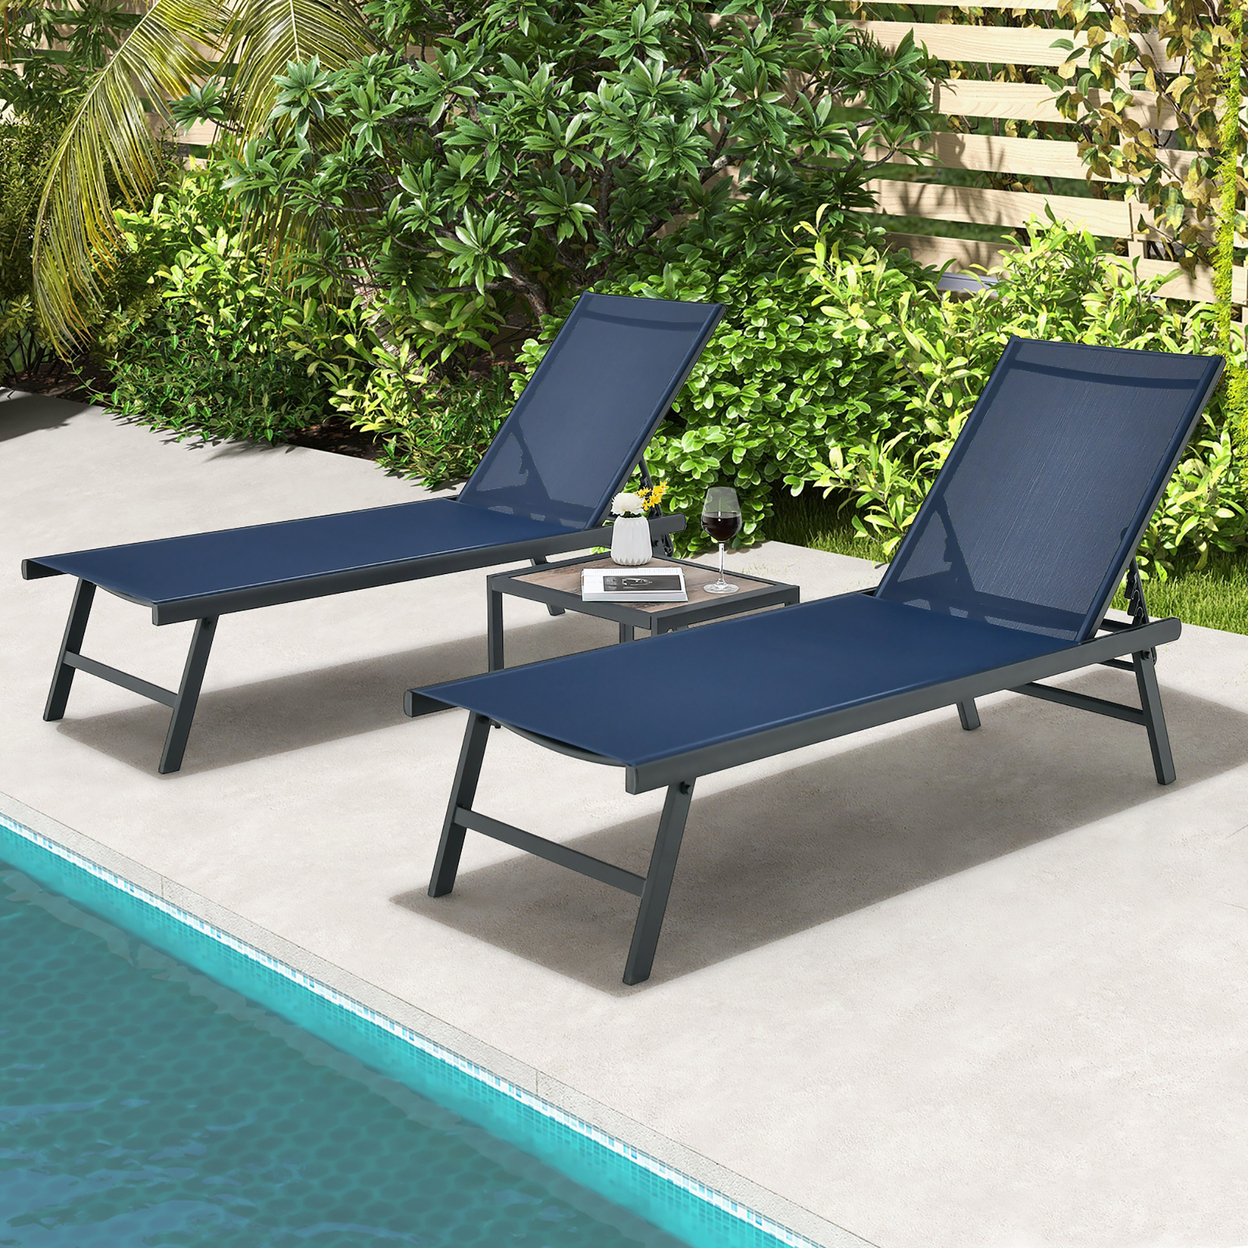 3pcs Patio Chaise Lounge Set Aluminum Recliner Chair Table Outdoor Adjust - Navy